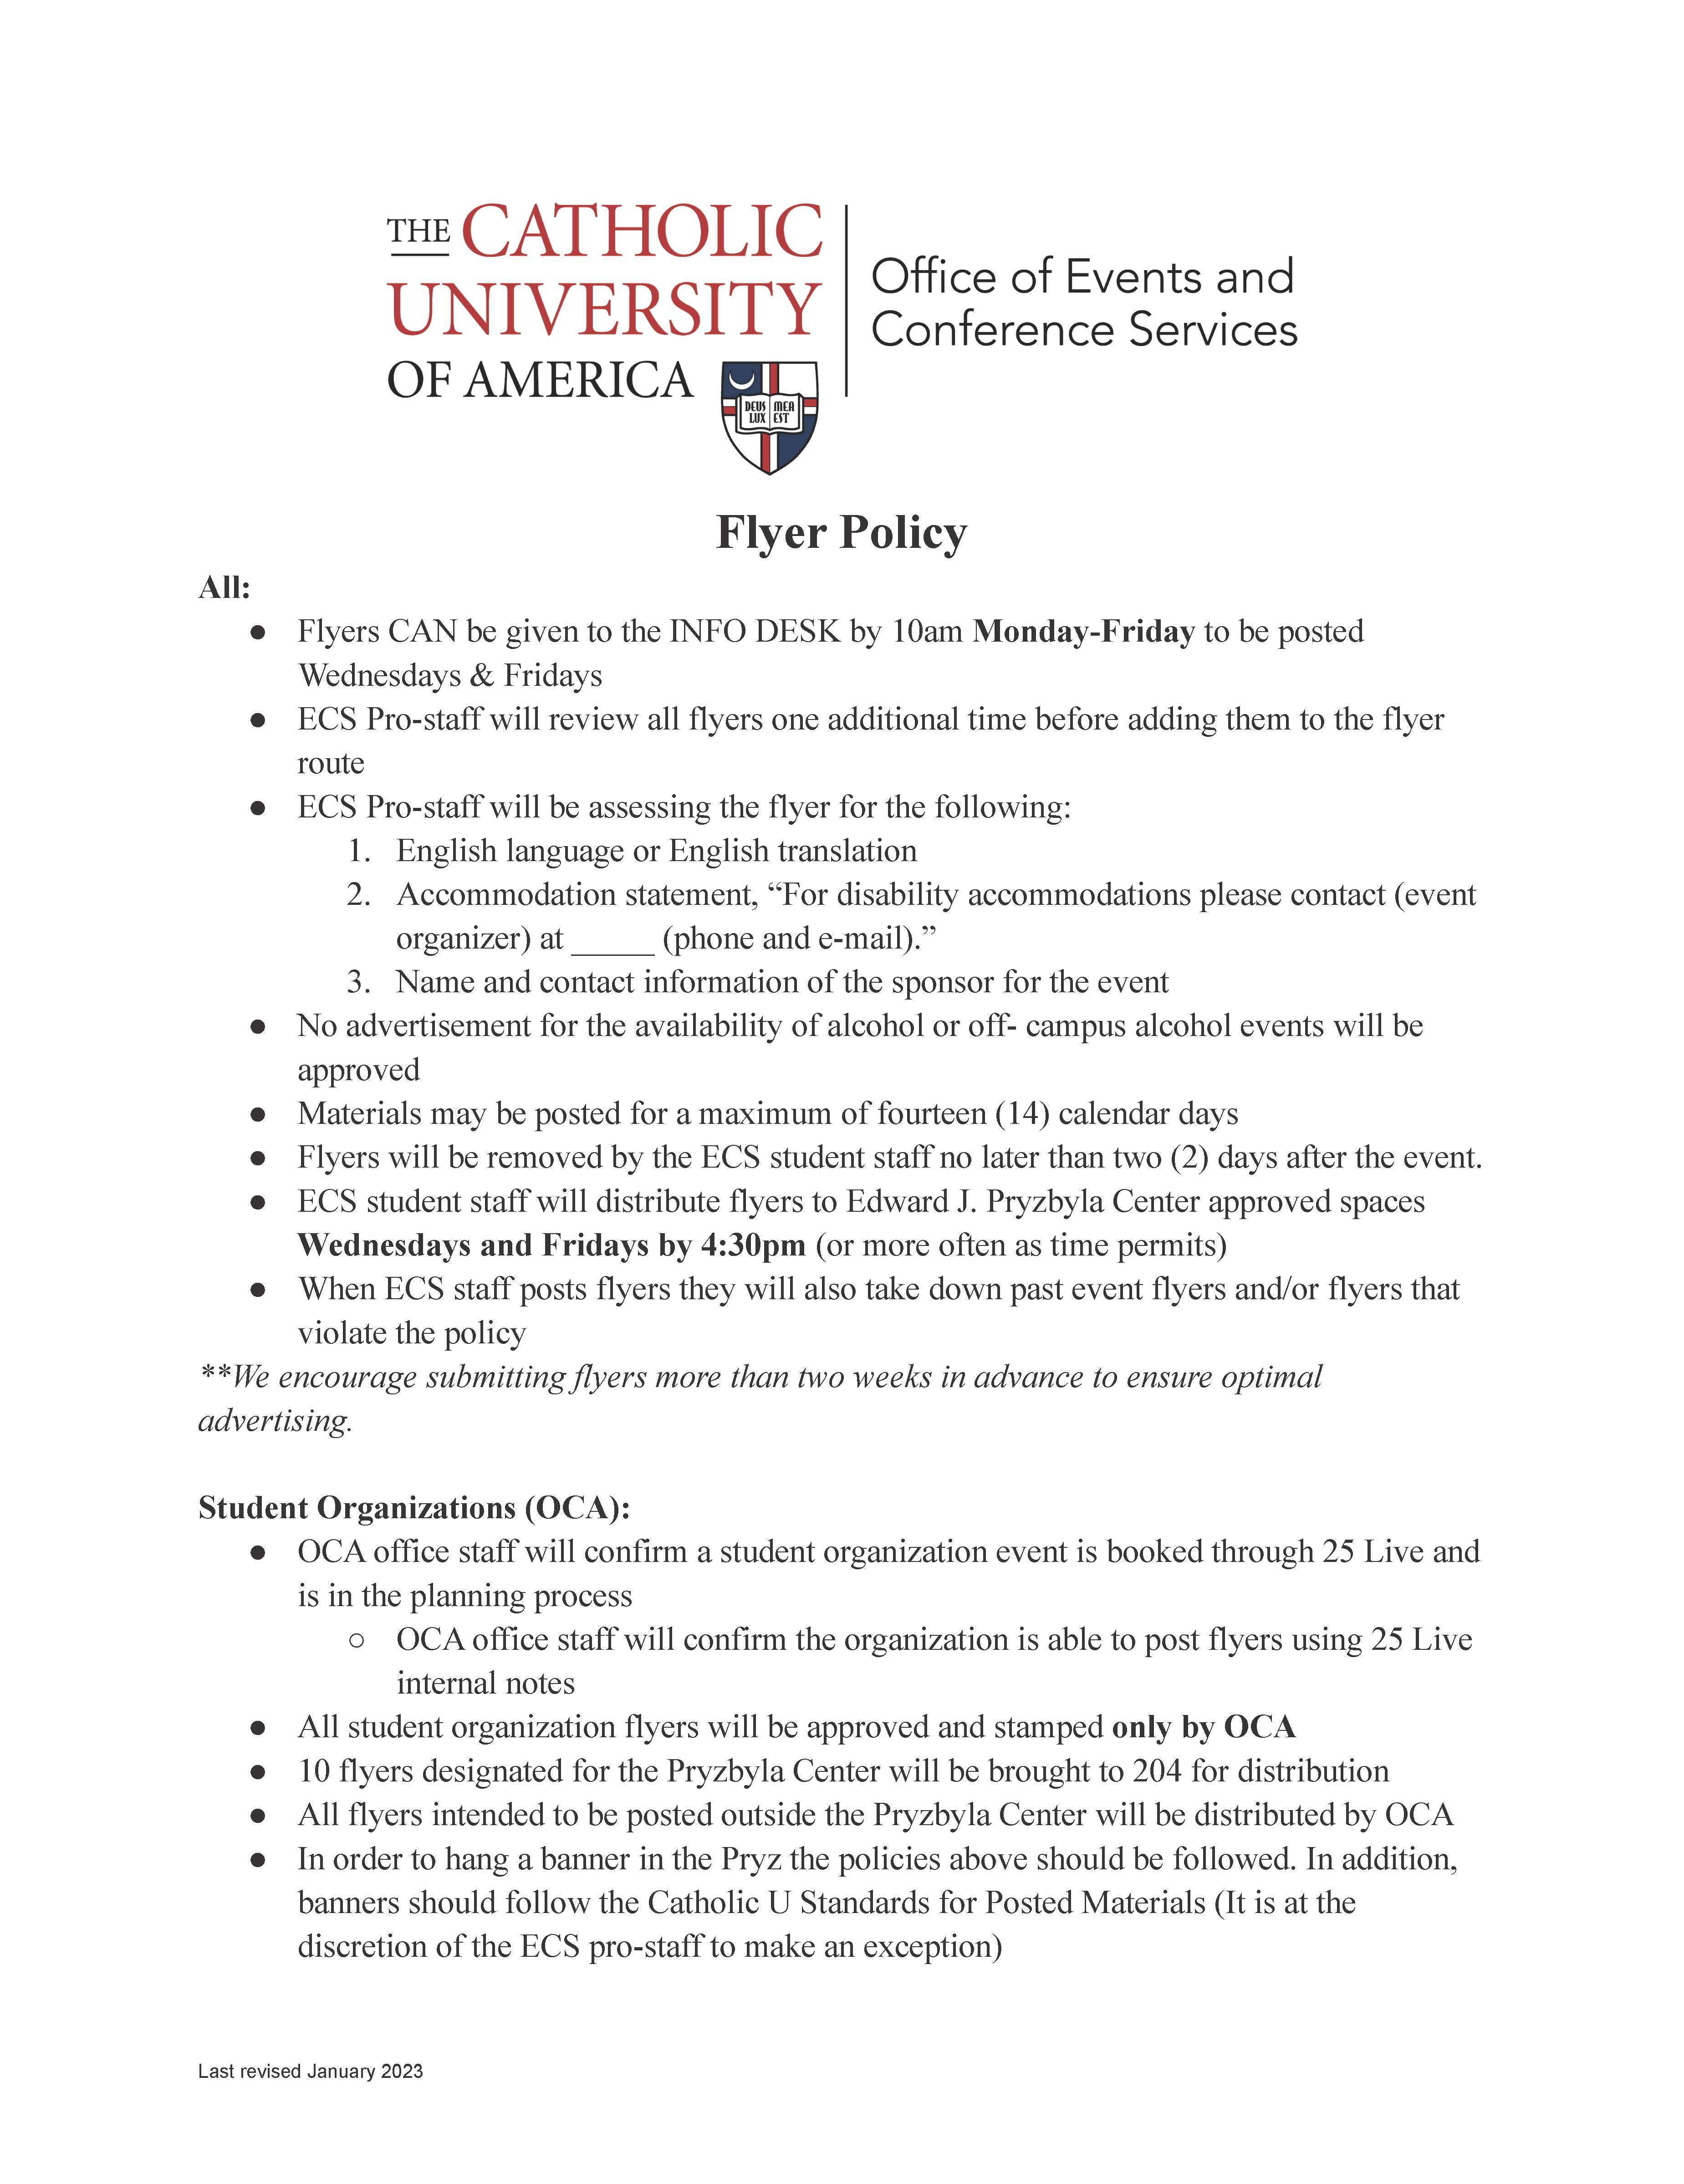 flyer-policy-january-2023_page_1.jpg